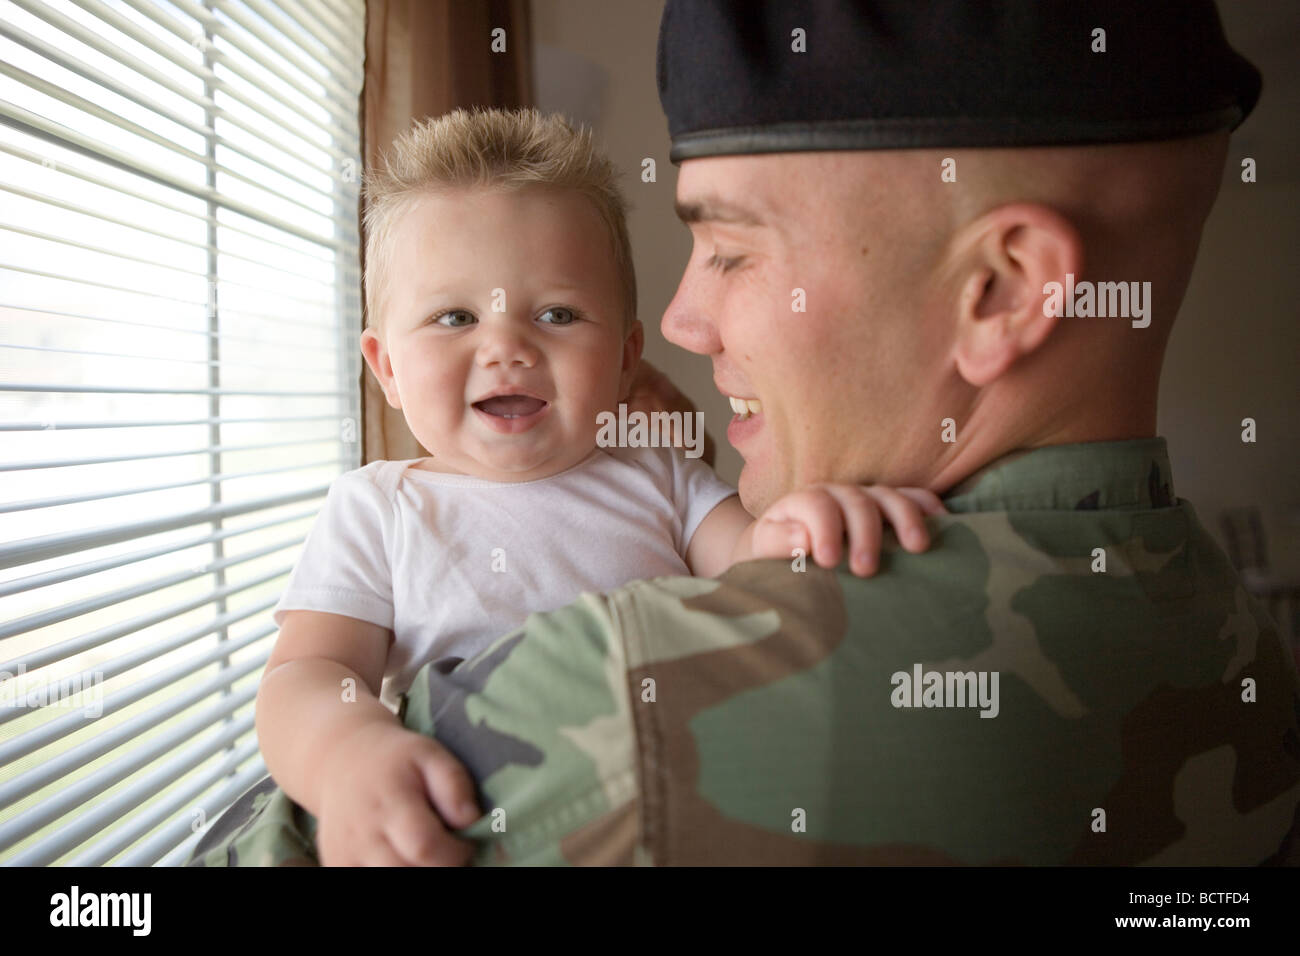 american military father coming home and greeting his infant son with a hug Stock Photo